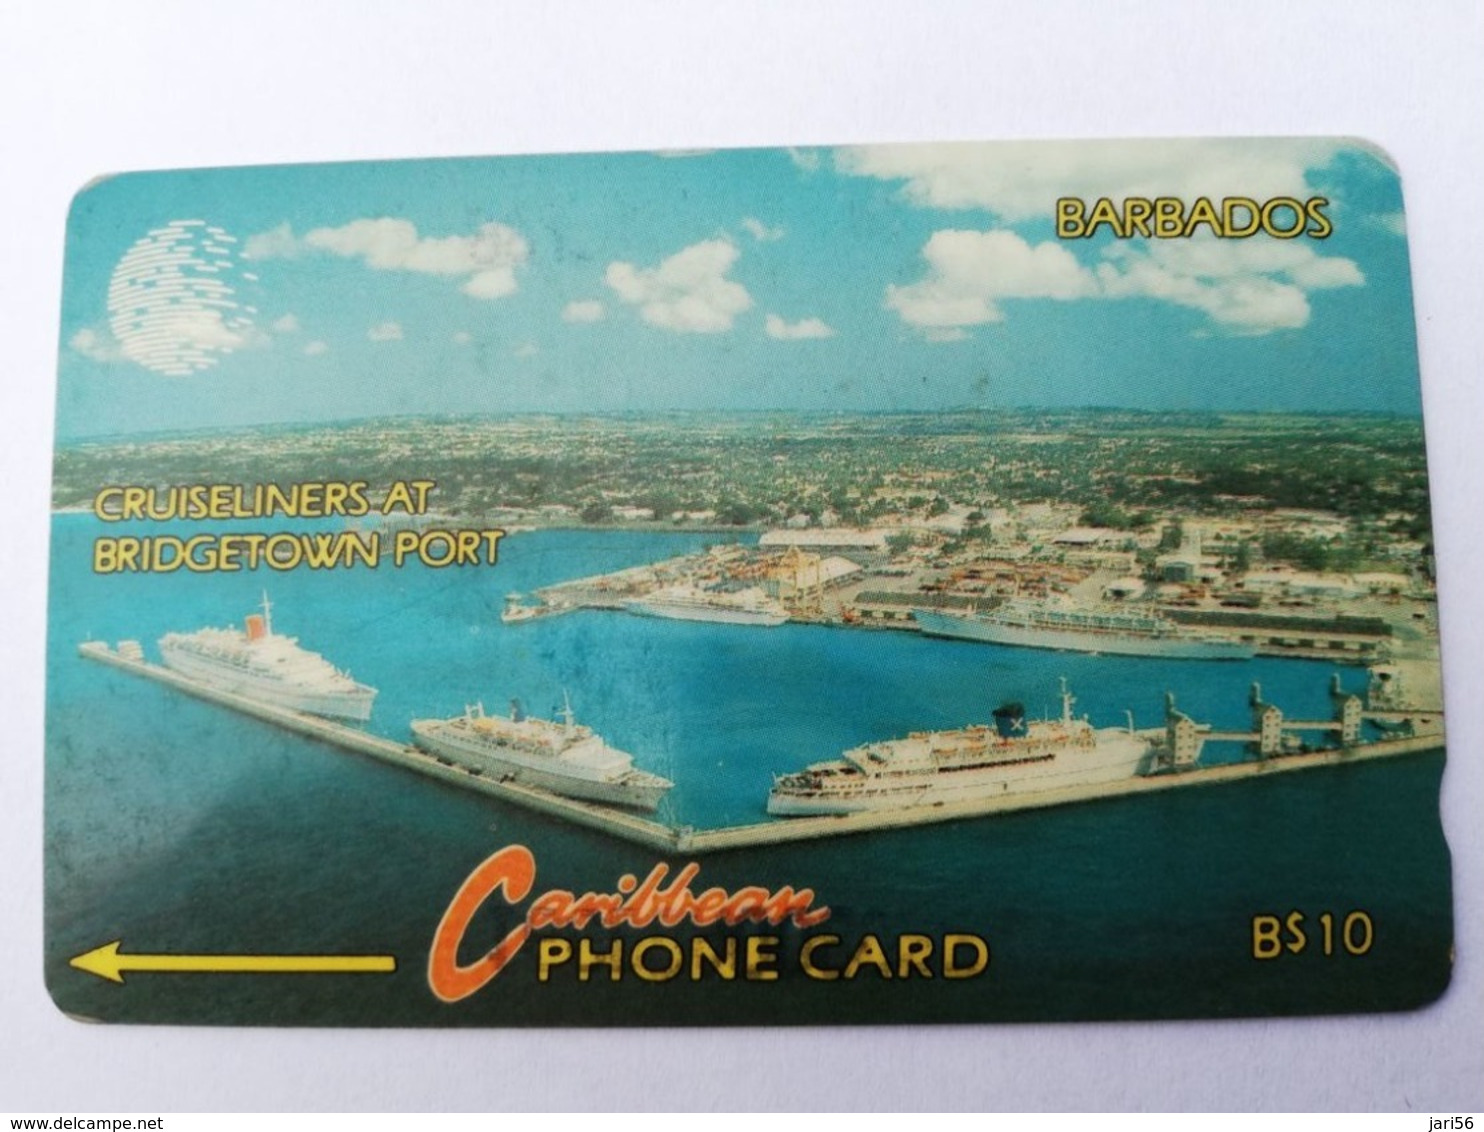 BARBADOS   $10-  Gpt Magnetic     BAR-12A  12CBDA   CRUISELINERS       NEW  LOGO         Very Fine Used  Card  ** 2882** - Barbados